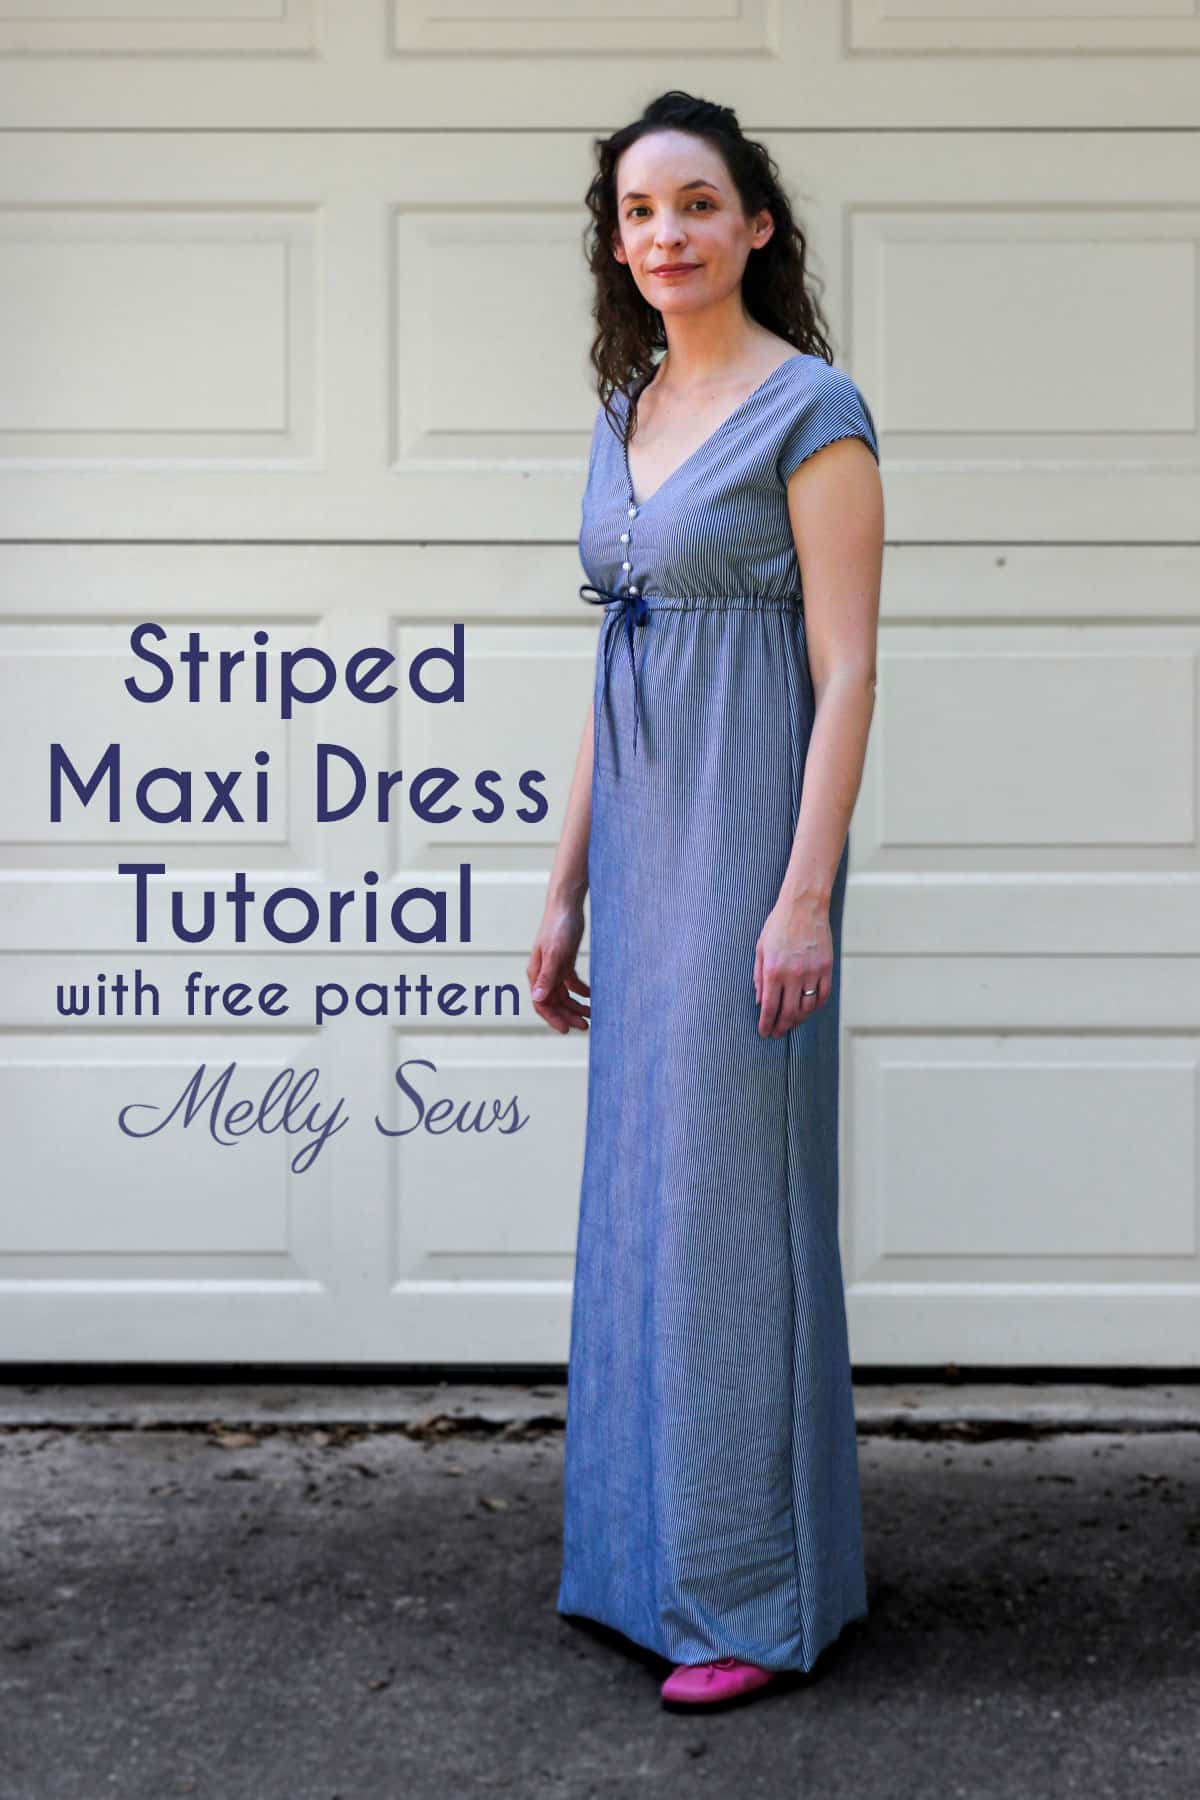 How to Make a Ballgown: 12 Steps (with Pictures) - wikiHow